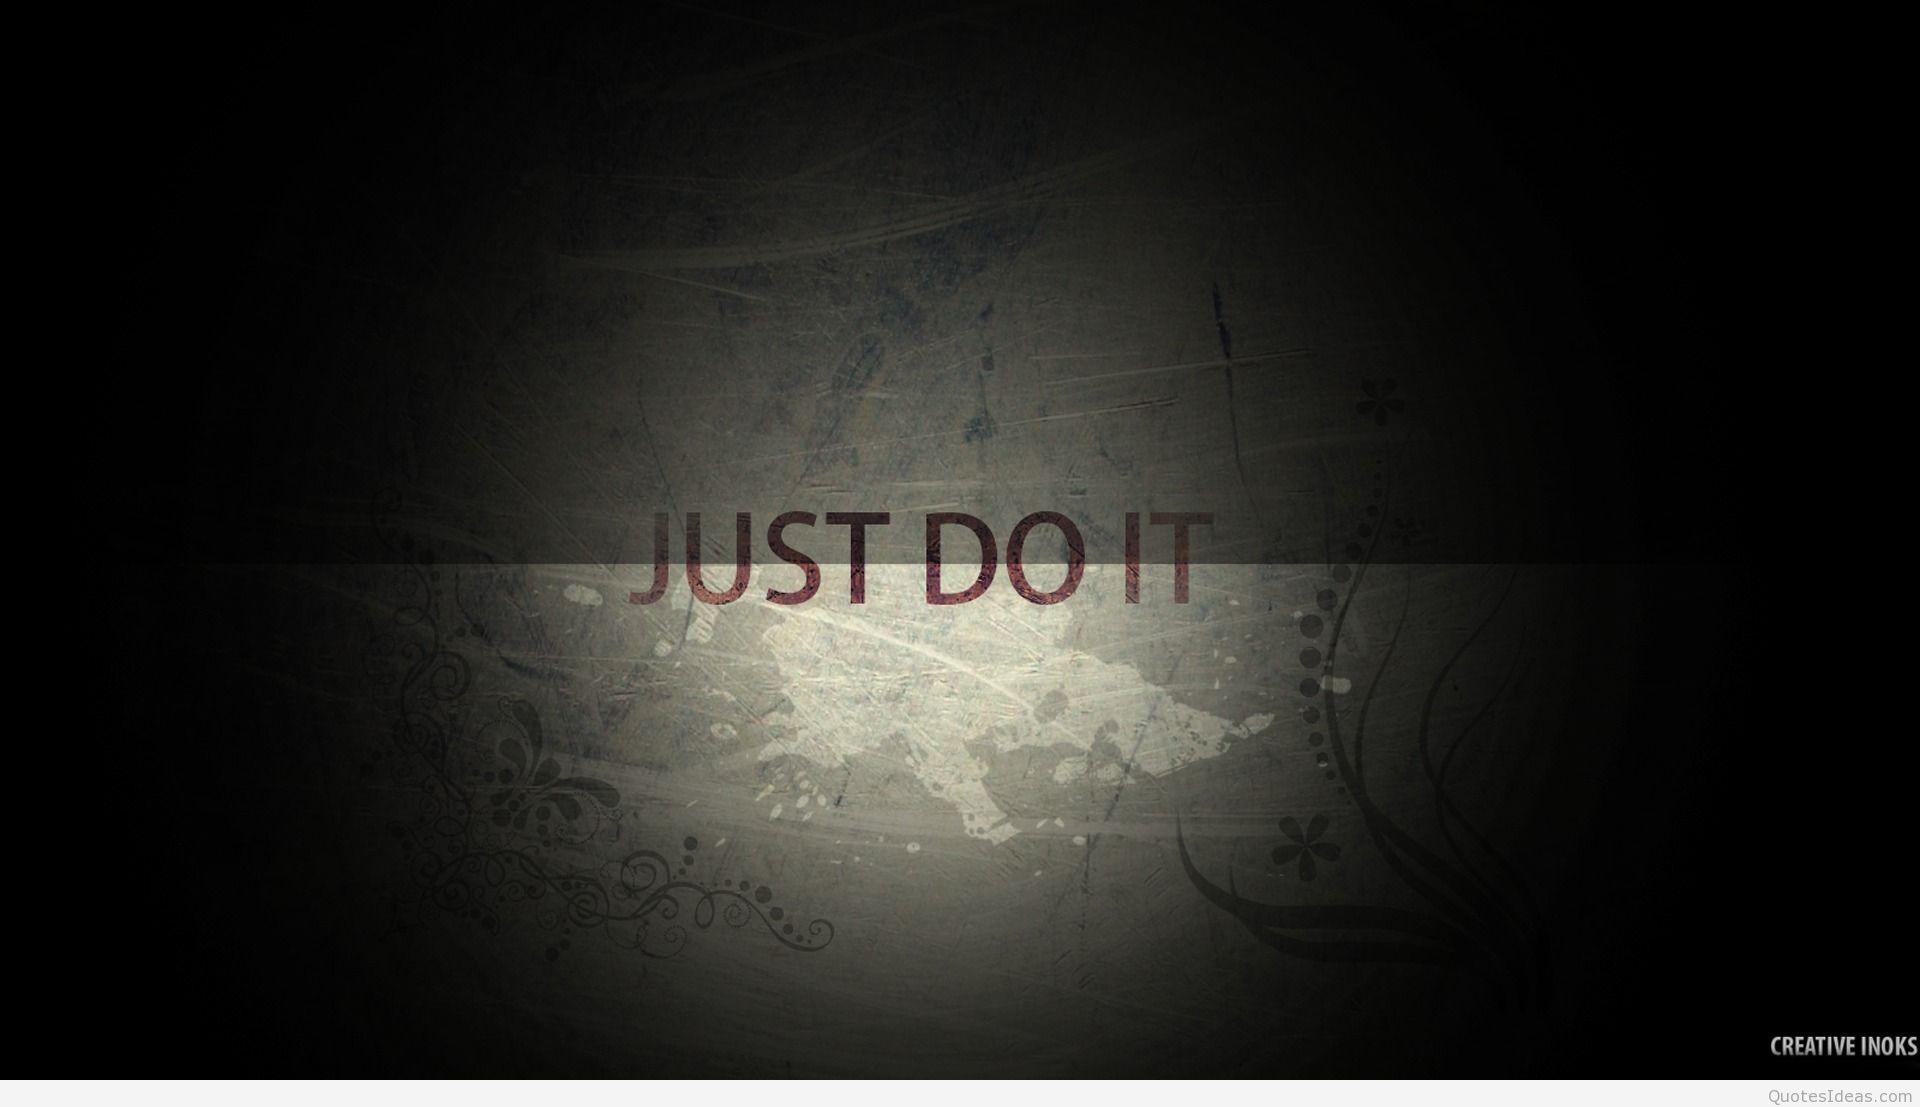 Just do it nike motivational quote wallpaper hd